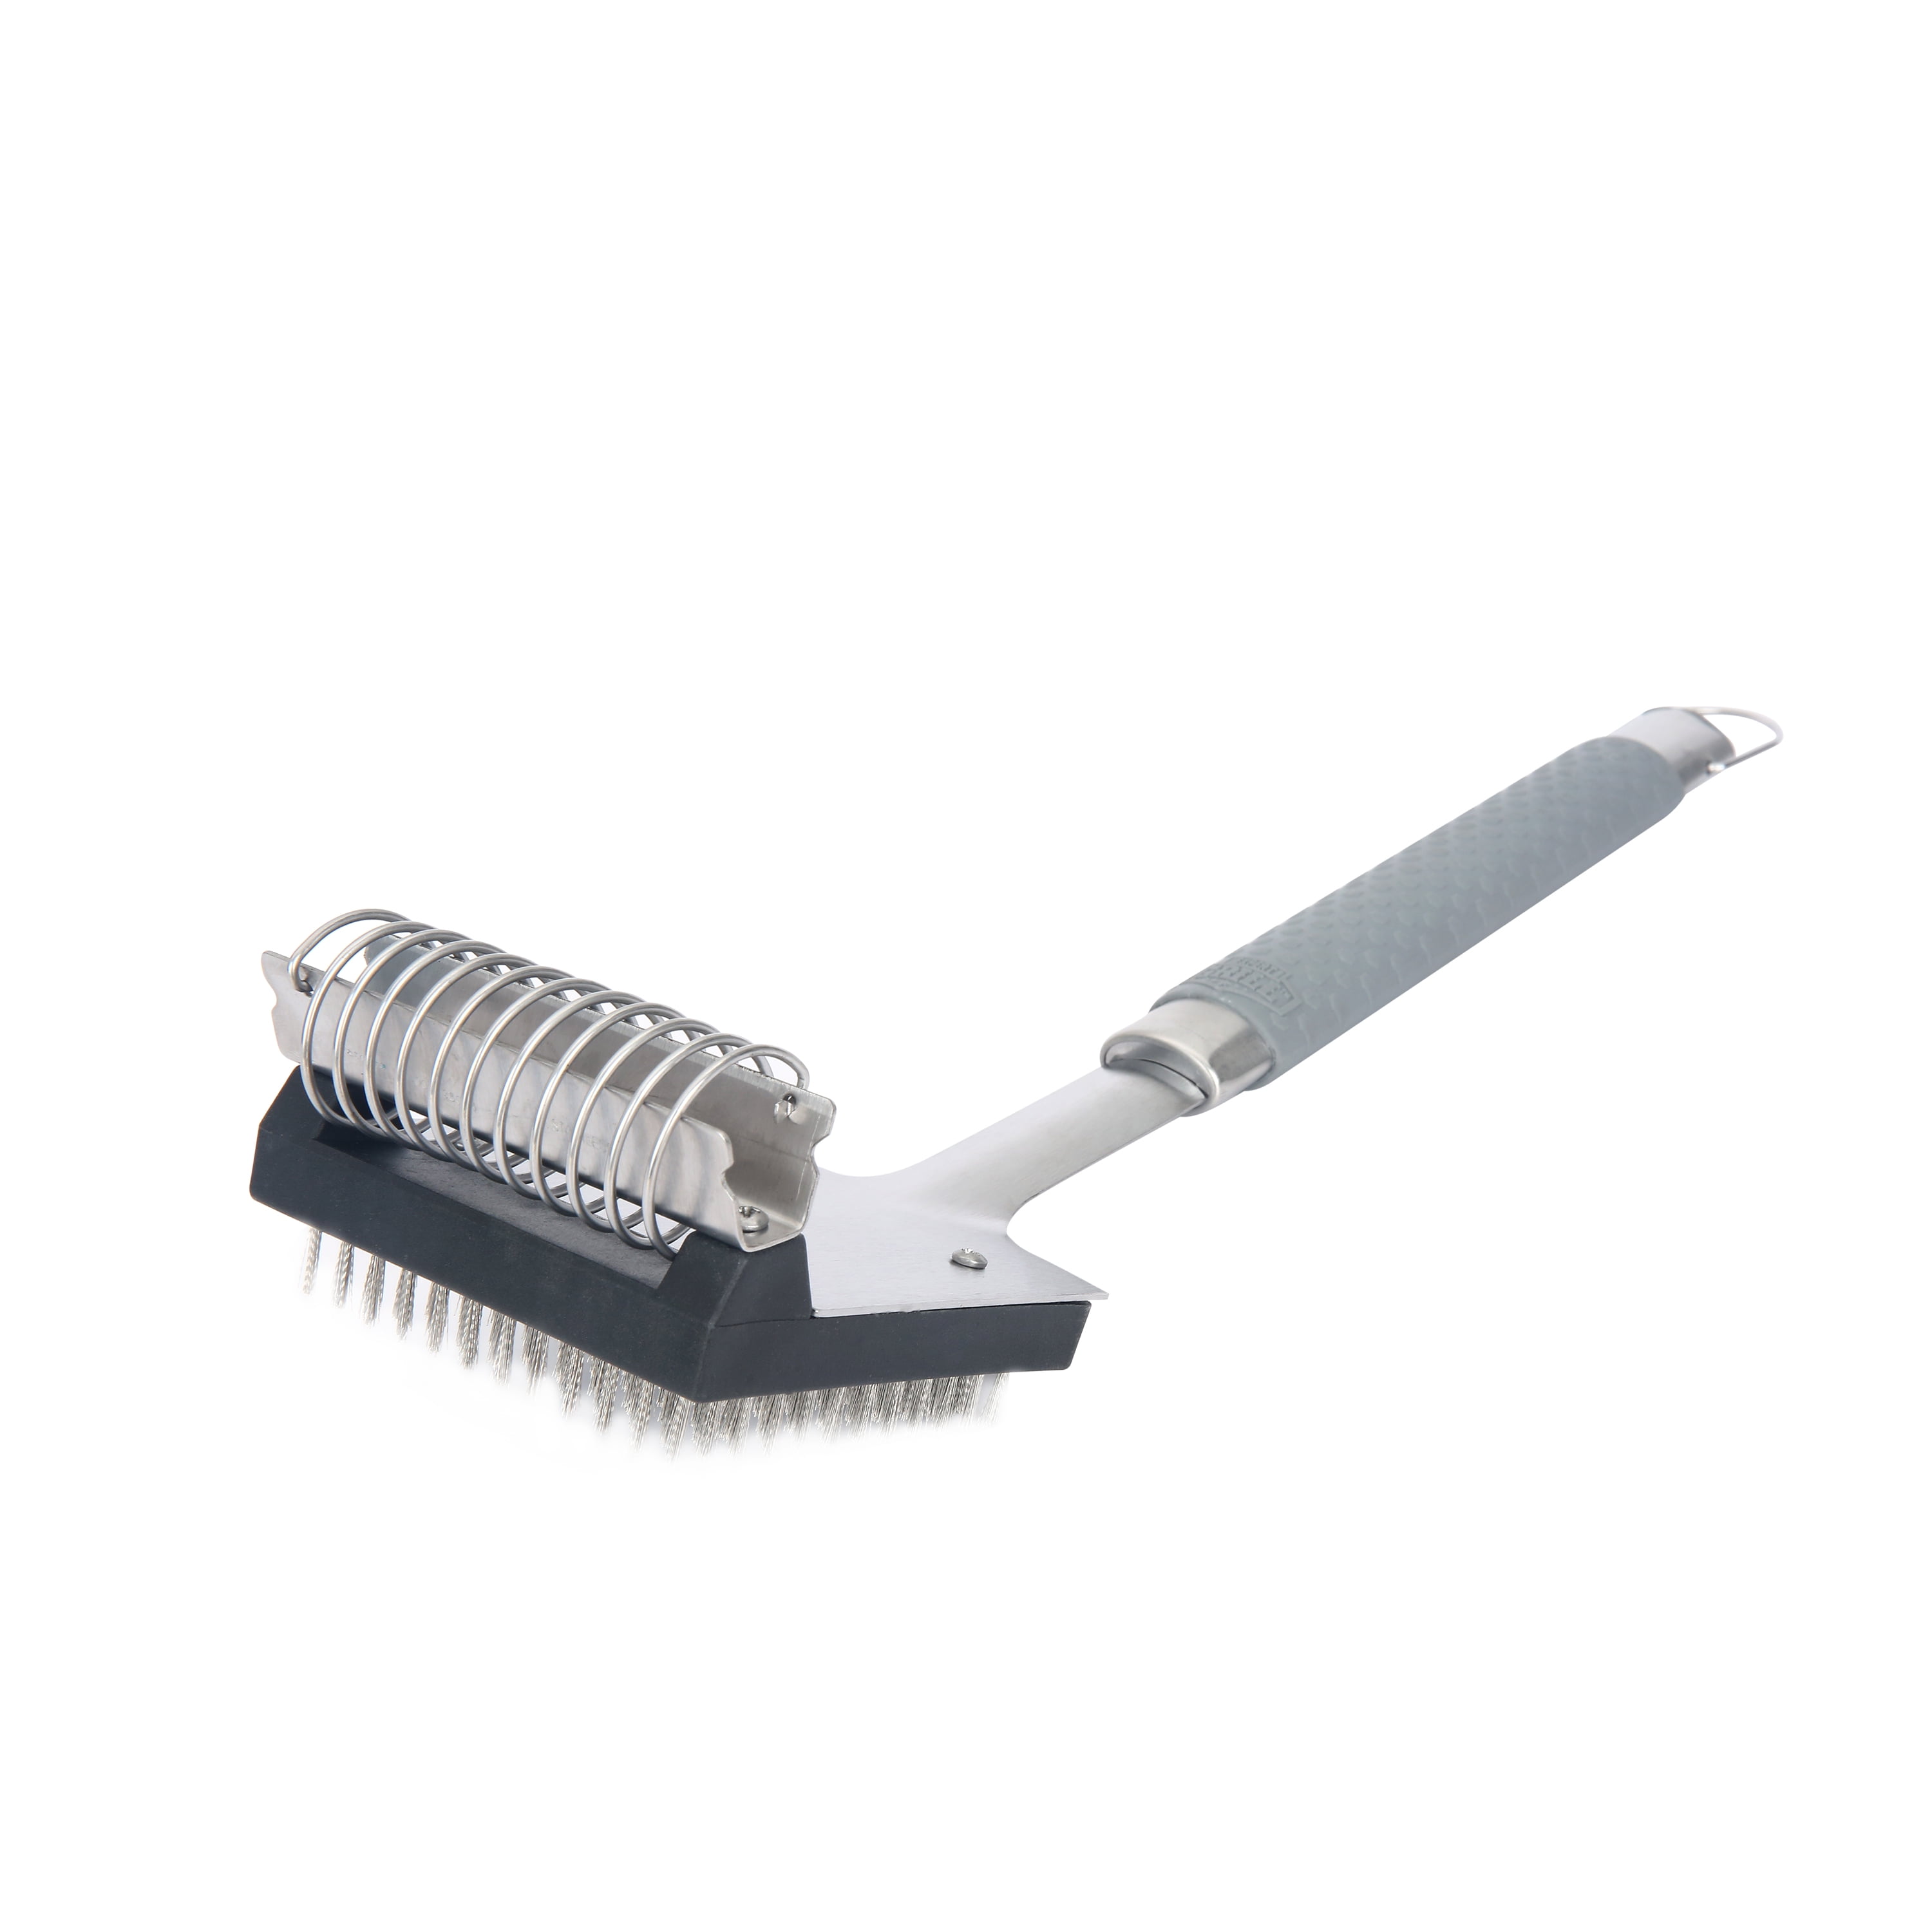  Double Sided Grill Cleaning Brush and Scraper, 16.5